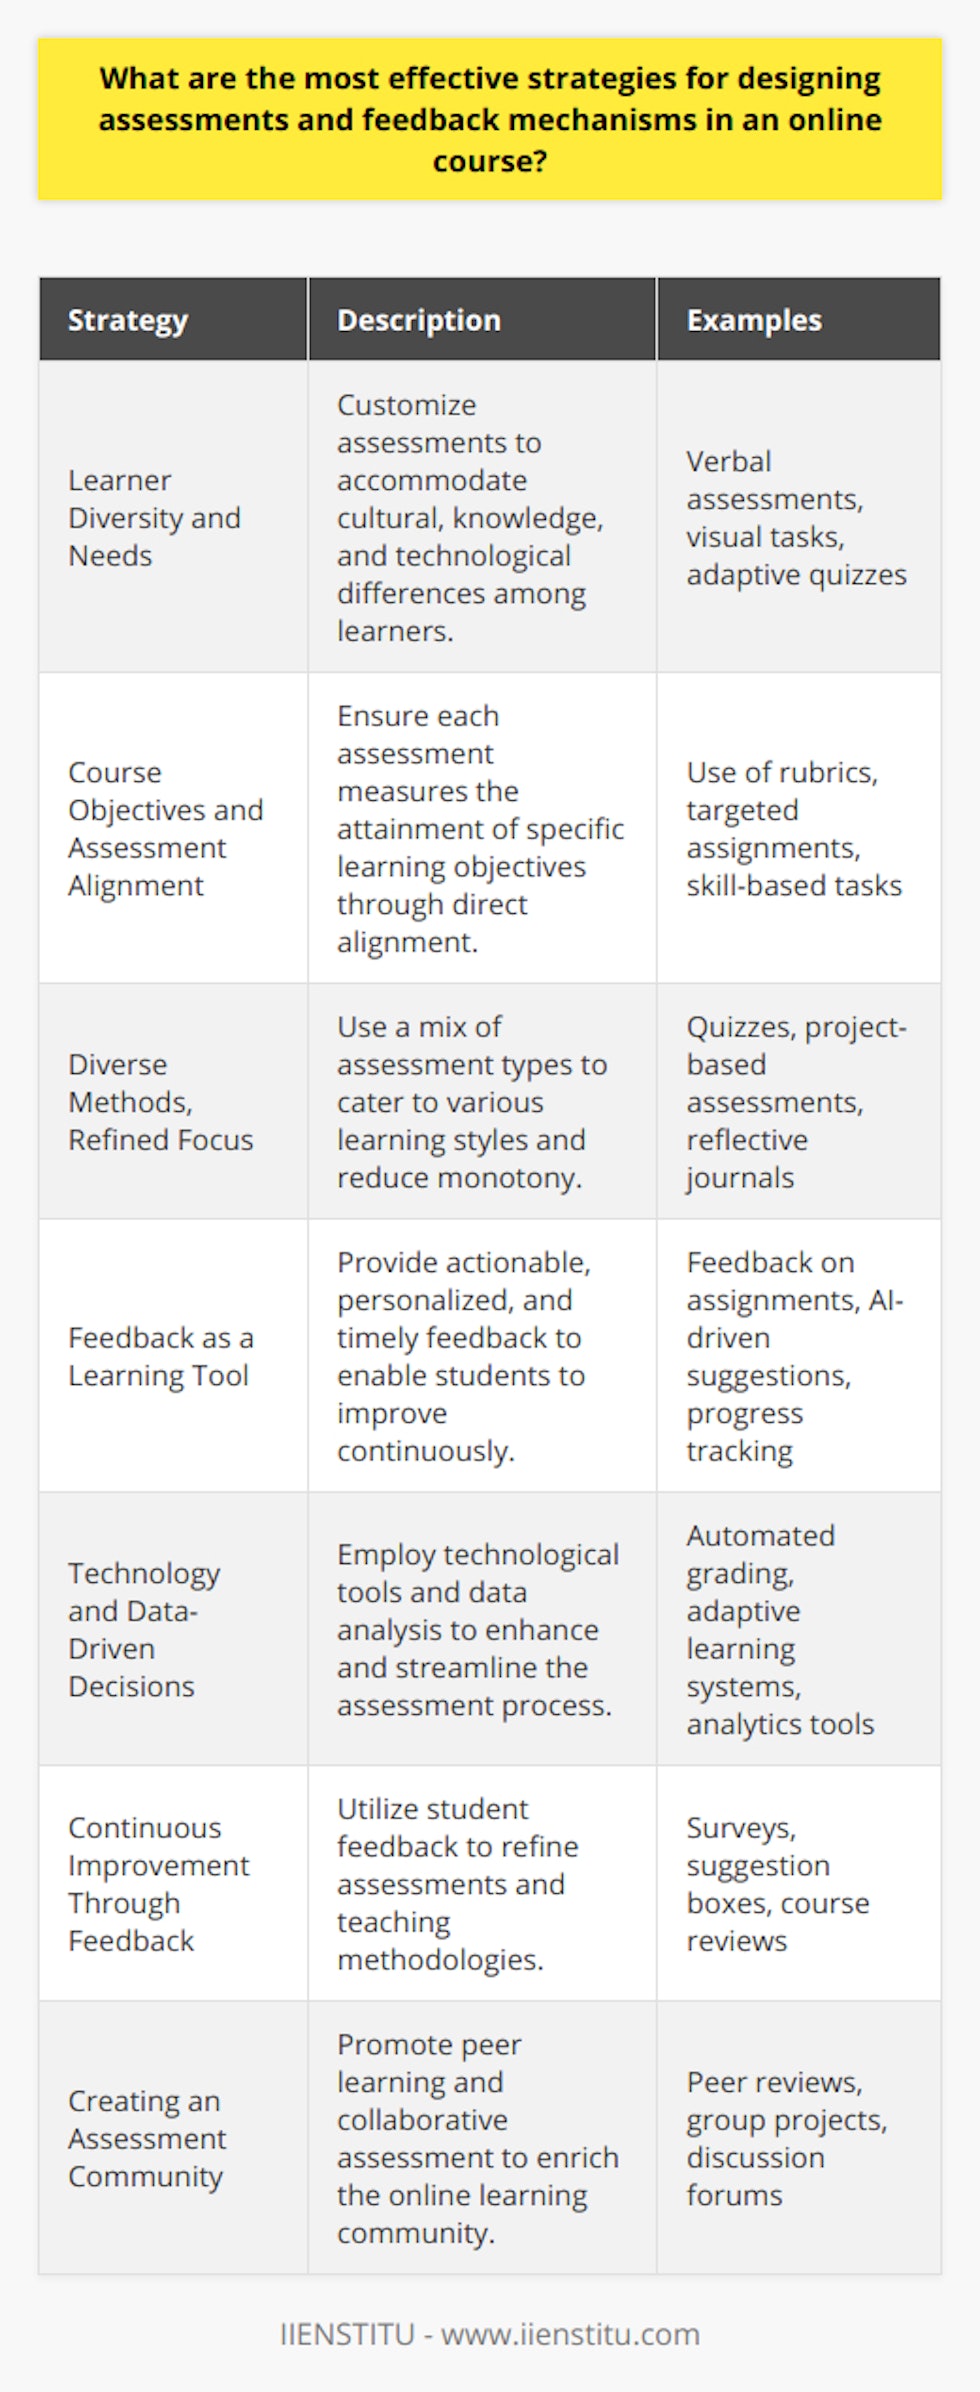 Designing effective assessments and feedback mechanisms is crucial for the success of any online course. These strategies must consider learner diversity, course objectives, and the potential of technology to create an optimal learning environment.**Learner Diversity and Needs**A nuanced understanding of the needs of online learners is essential. This requires recognizing various factors that influence learning such as cultural backgrounds, prior knowledge, and technological familiarity. Tailoring assessments to meet these needs while remaining challenging and fair is critical. An example of addressing diverse needs is providing alternative assessment formats, like verbal assessments for those with writing difficulties or visual tasks for visual learners.**Course Objectives and Assessment Alignment**The most successful assessments directly align with the learning objectives of the course. They should measure not only content knowledge but also the application of skills learned throughout the course. Rubrics can be instrumental in demonstrating this alignment, clearly indicating how each assessment task relates to specific learning outcomes, and providing transparent criteria for success.**Diverse Methods, Refined Focus**Incorporating a variety of assessment methods caters to different learning styles and reduces the likelihood of assessment fatigue. This might include a blend of quizzes for factual recall, project-based assessments for applied skills, and reflective journals for personal growth. Each type should have a clear purpose and target a specific area of knowledge or skill within the course framework.**Feedback as a Learning Tool**Feedback is a powerful tool that, when used effectively, promotes learning and achievement. It should be actionable, specific to individual work, and timely, allowing students to make real-time improvements. Constructive feedback not only guides learners but also motivates and encourages further engagement with the course material.**Technology and Data-Driven Decisions**Leveraging technology can streamline the assessment process. Intelligent use of quizzes, automated grading systems, and feedback mechanisms powered by AI can provide immediate results to learners. Furthermore, the data collected from online assessments can be analyzed to pinpoint trends, gaps in knowledge, and areas needing curricular adjustment.**Continuous Improvement Through Feedback**The feedback mechanism should be a two-way street. Instructors can actively seek feedback on their assessments and teaching methods through surveys or suggestion boxes. Incorporating student feedback into course design can significantly enhance the relevance and effectiveness of assessments.**Creating an Assessment Community**Online courses can foster a sense of community through peer assessments and collaborative projects, helping students learn from each other. By teaching students how to give constructive feedback to their peers, the assessment process becomes even more engaging and participatory.In summary, effective assessment design in online courses depends on a solid understanding of learner diversity, a clear alignment with course objectives, variety in assessment methods, actionable feedback, smart use of technology, continuous improvement, and fostering a community. These strategies, implemented thoughtfully, create a robust framework for assessing student learning effectively in the online domain.